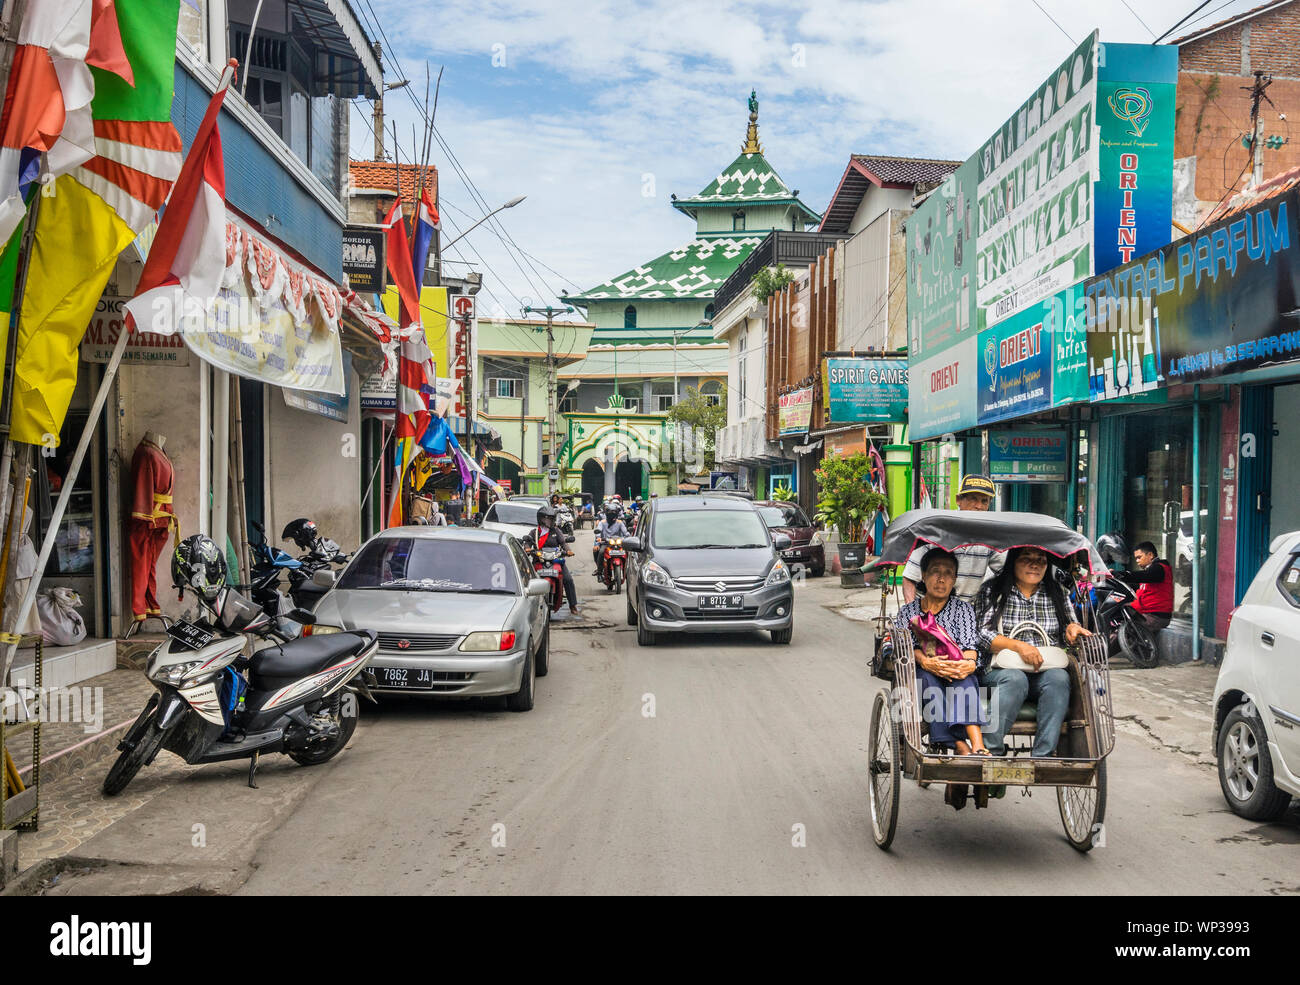 Jalan Kauman in Semarang Chinatown with view of the Semarang Central Mosque, Central Java, Indonesia Stock Photo